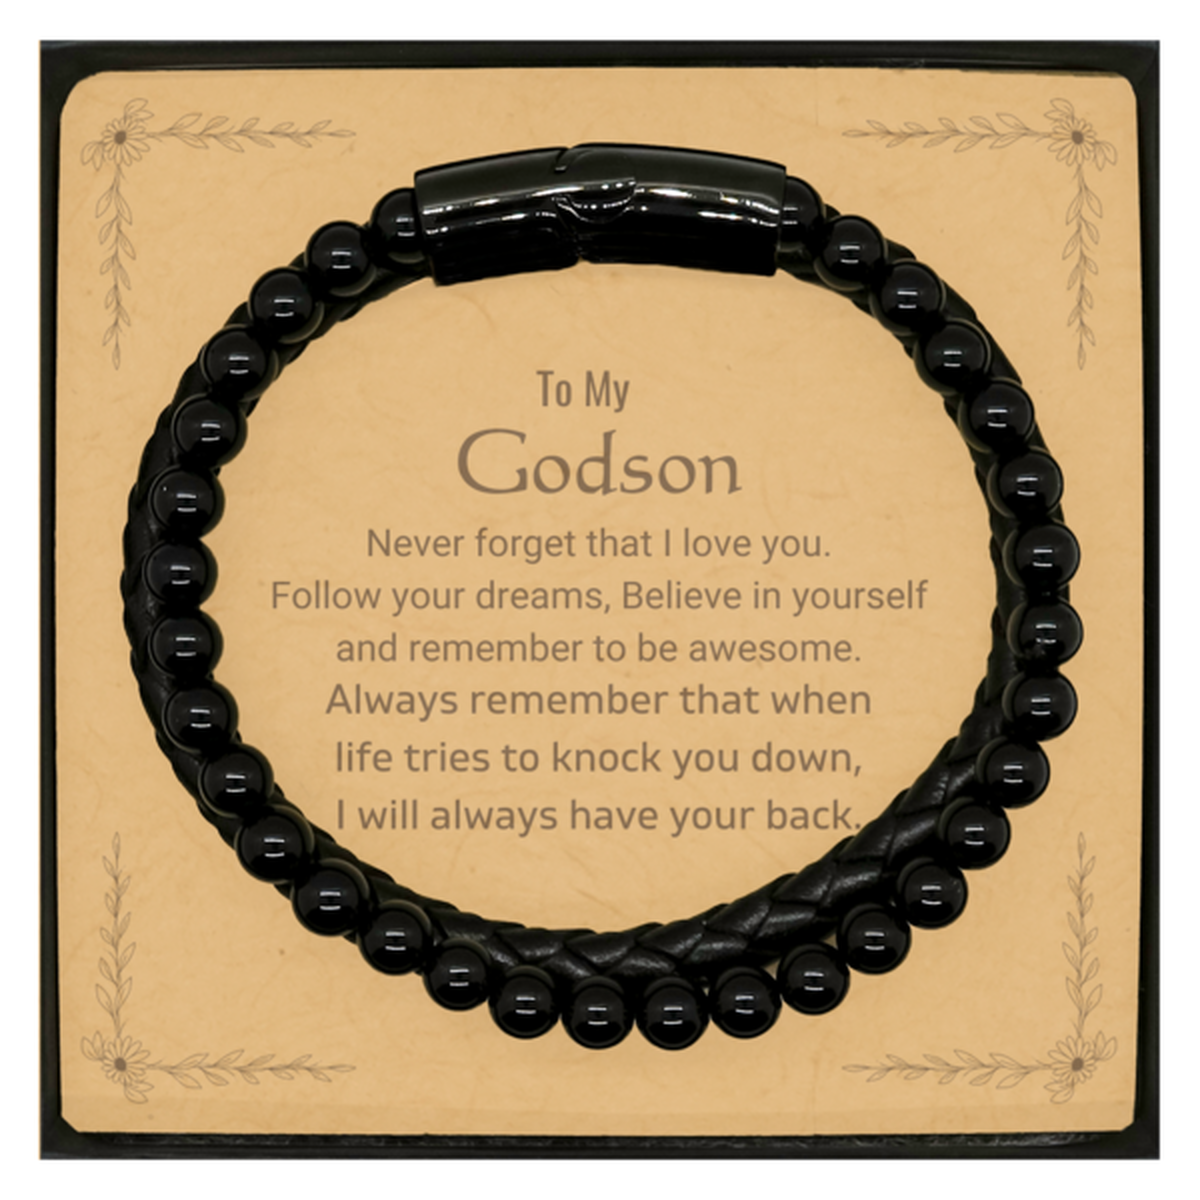 Inspirational Gifts for Godson, Follow your dreams, Believe in yourself, Godson Stone Leather Bracelets, Birthday Christmas Unique Gifts For Godson